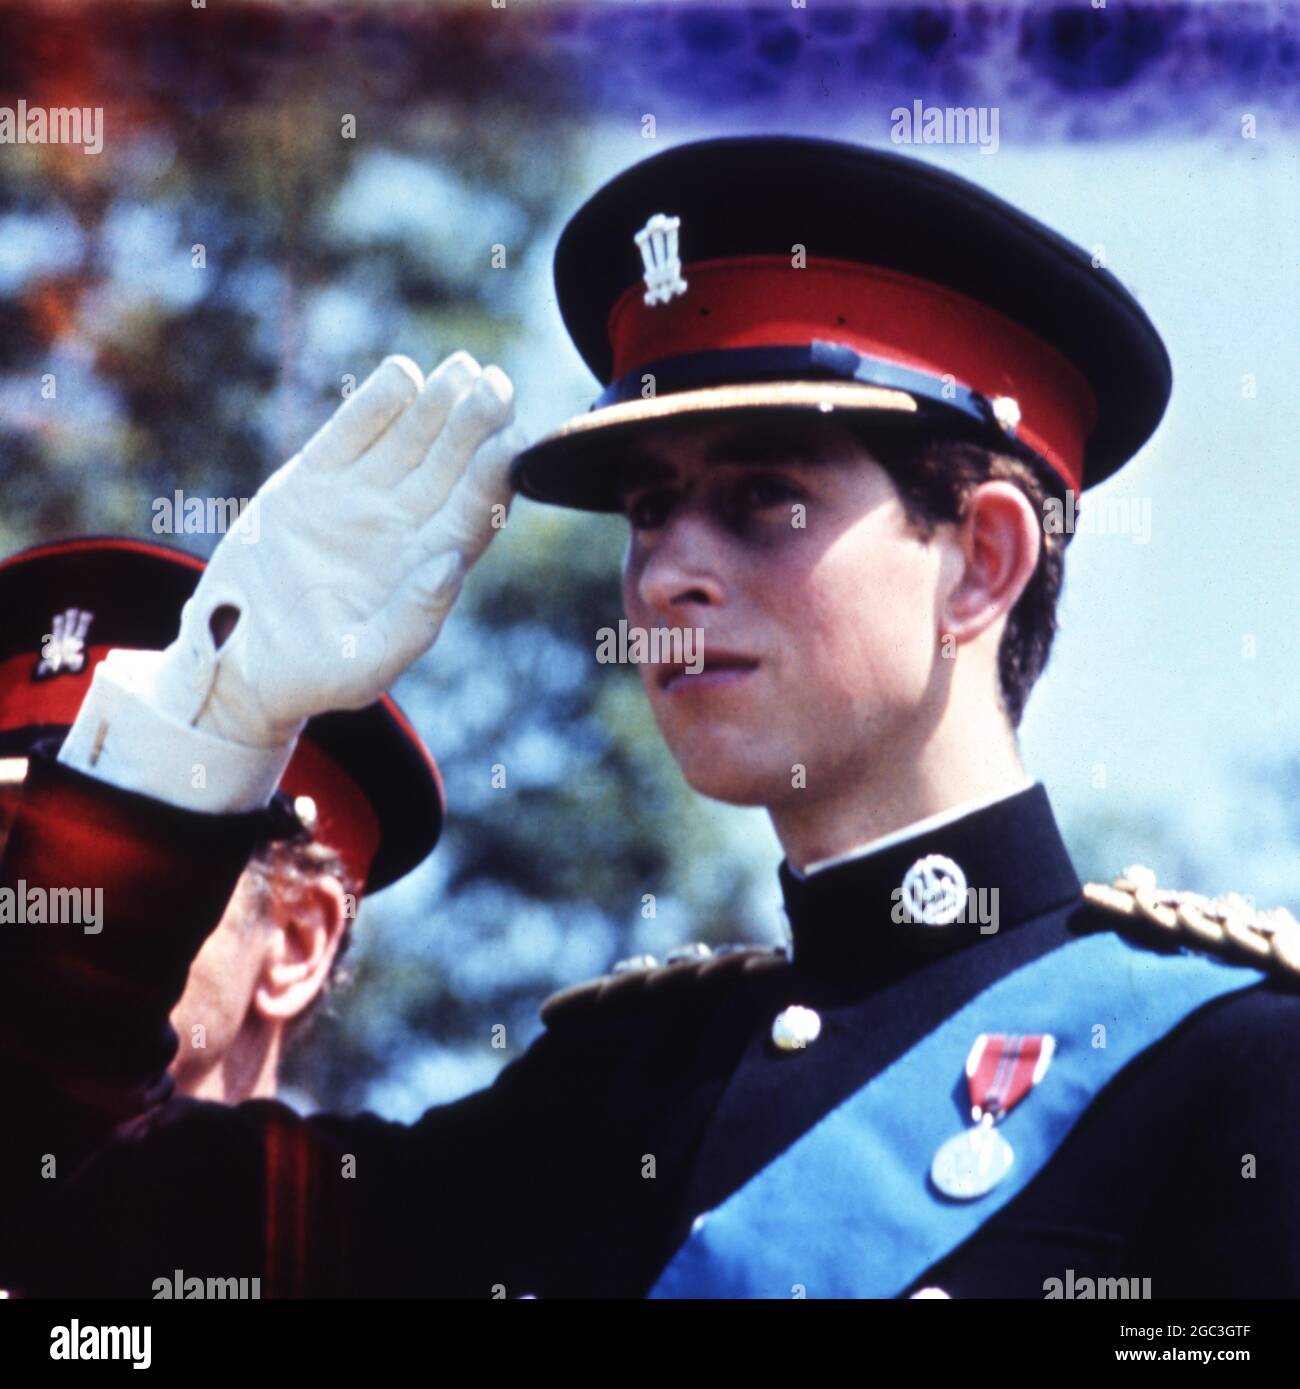 Prince Charles in uniform takes the salute. Stock Photo